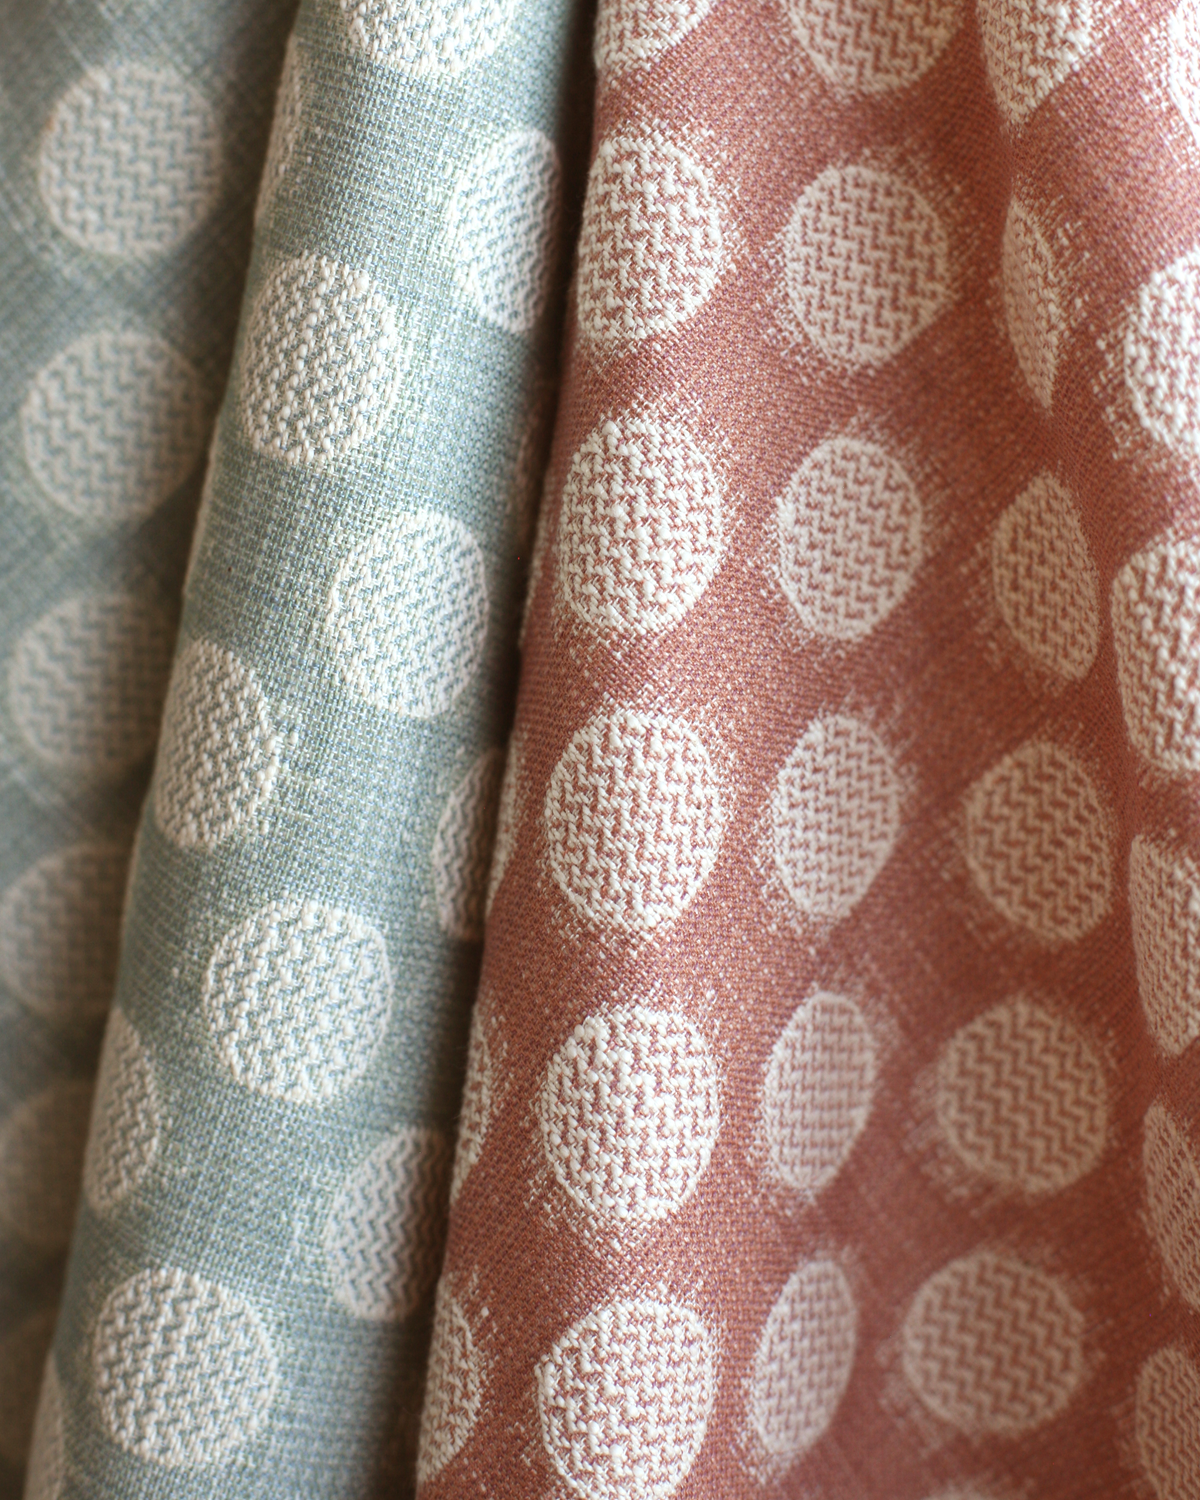 Chevron Dots Fabric in Pink